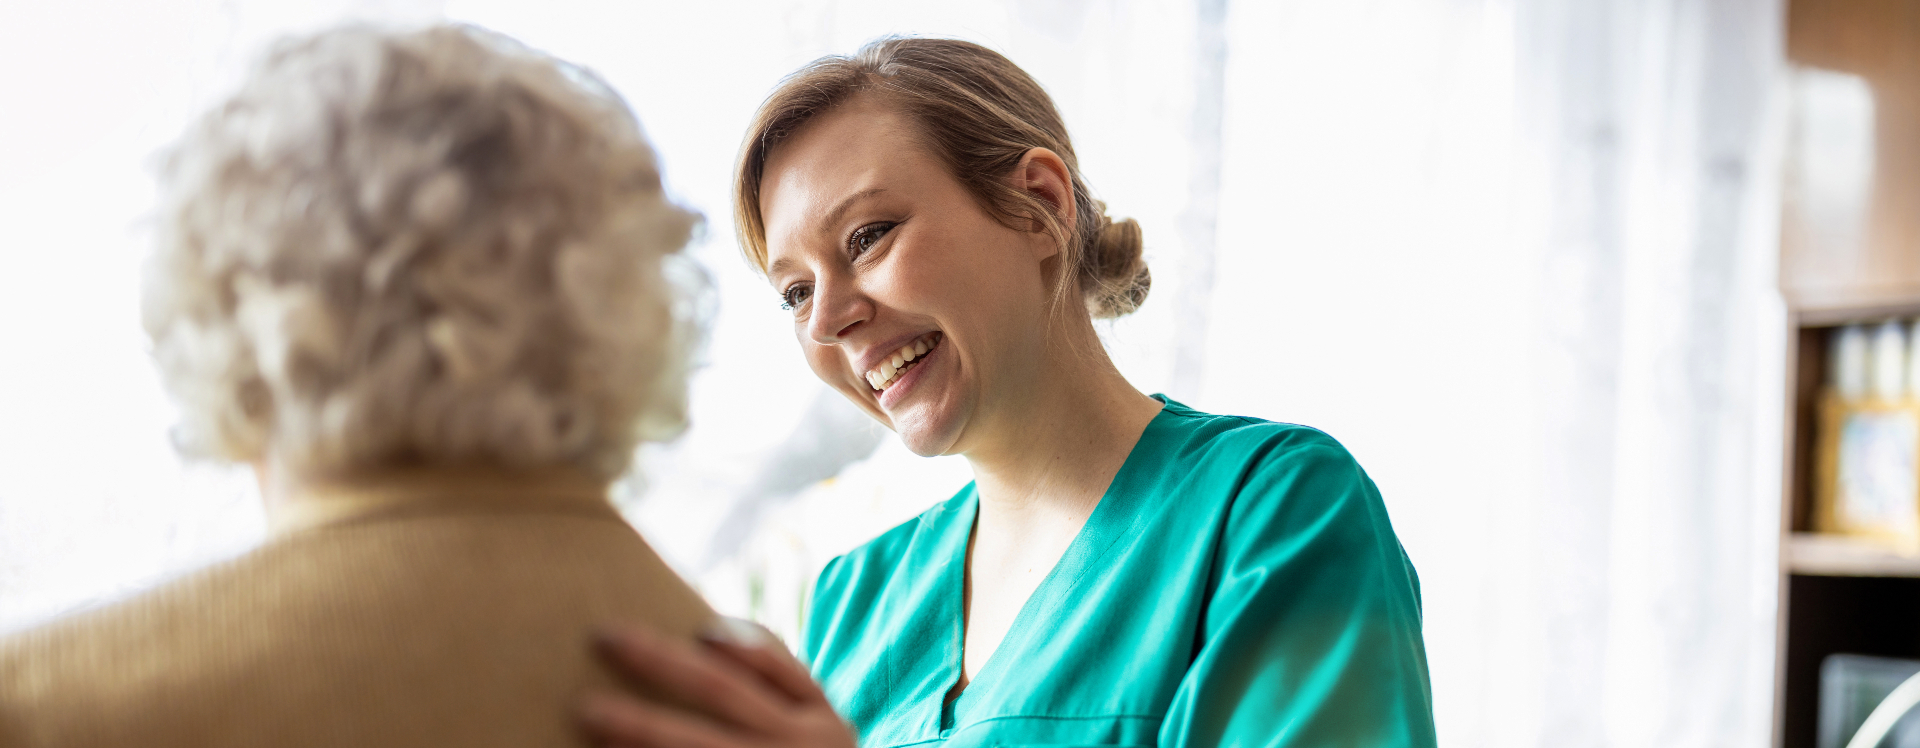 Friendly nurse supporting an elderly woman for healthcare career